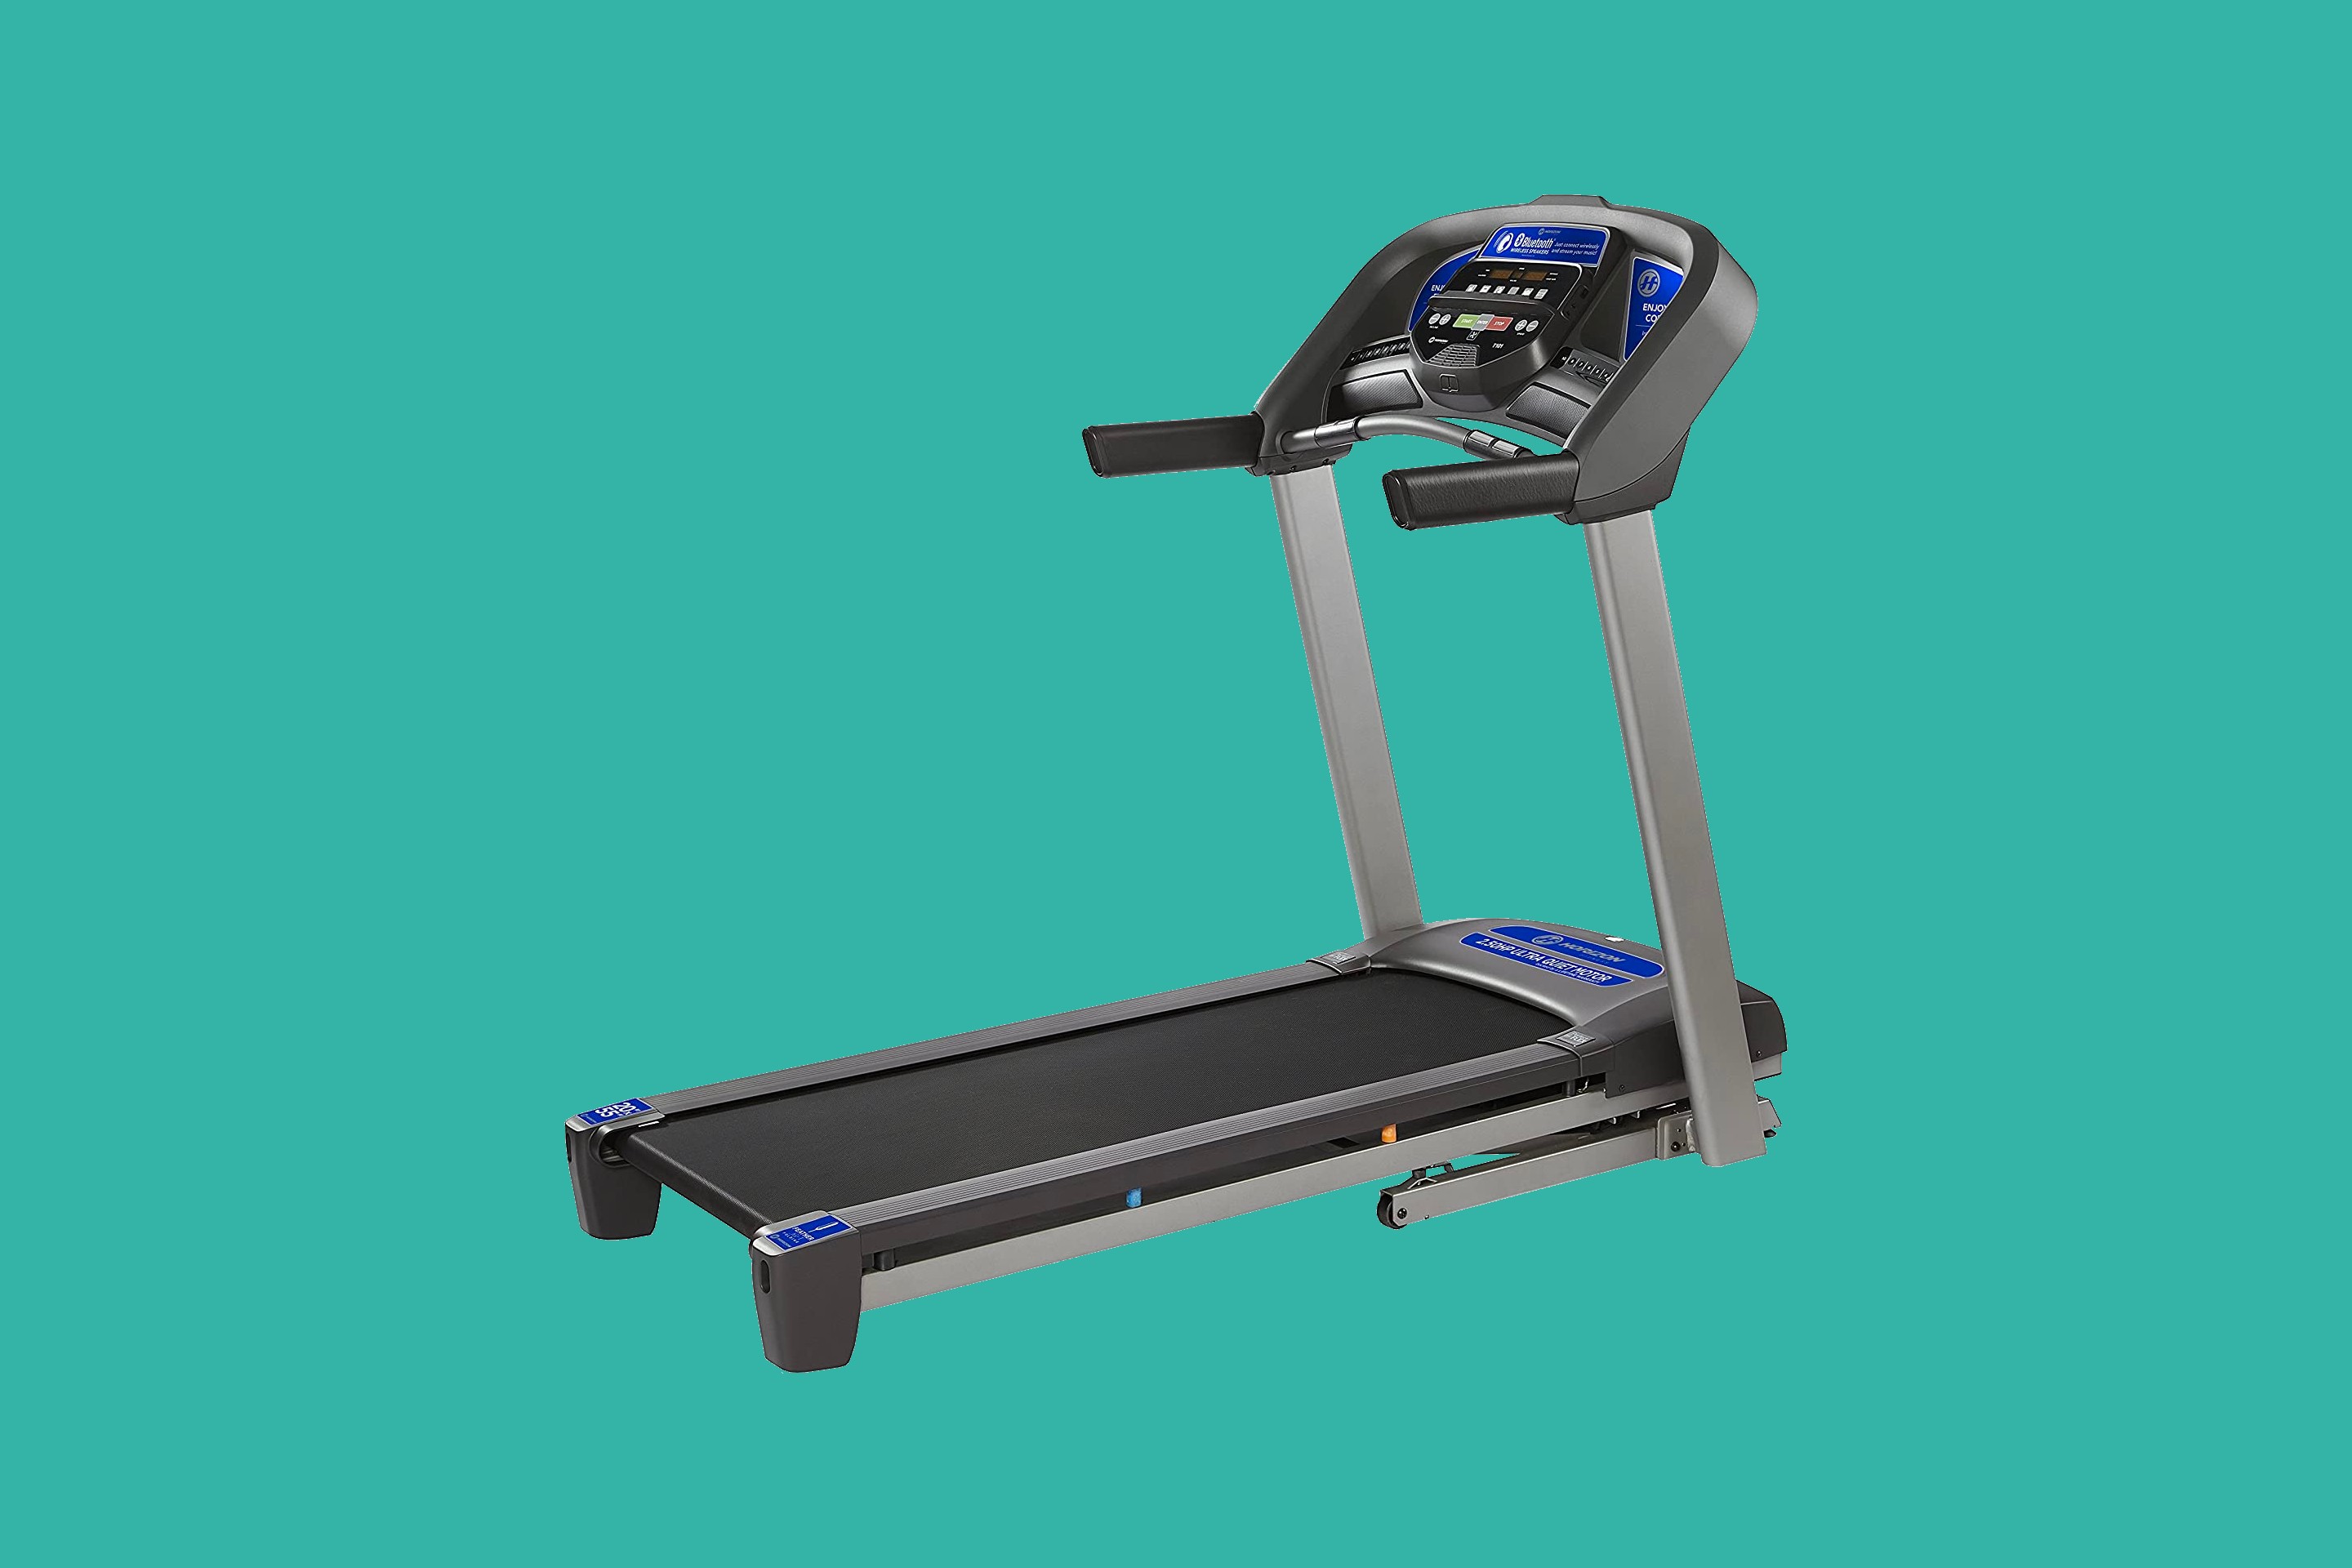 The Best Treadmills for Your Money